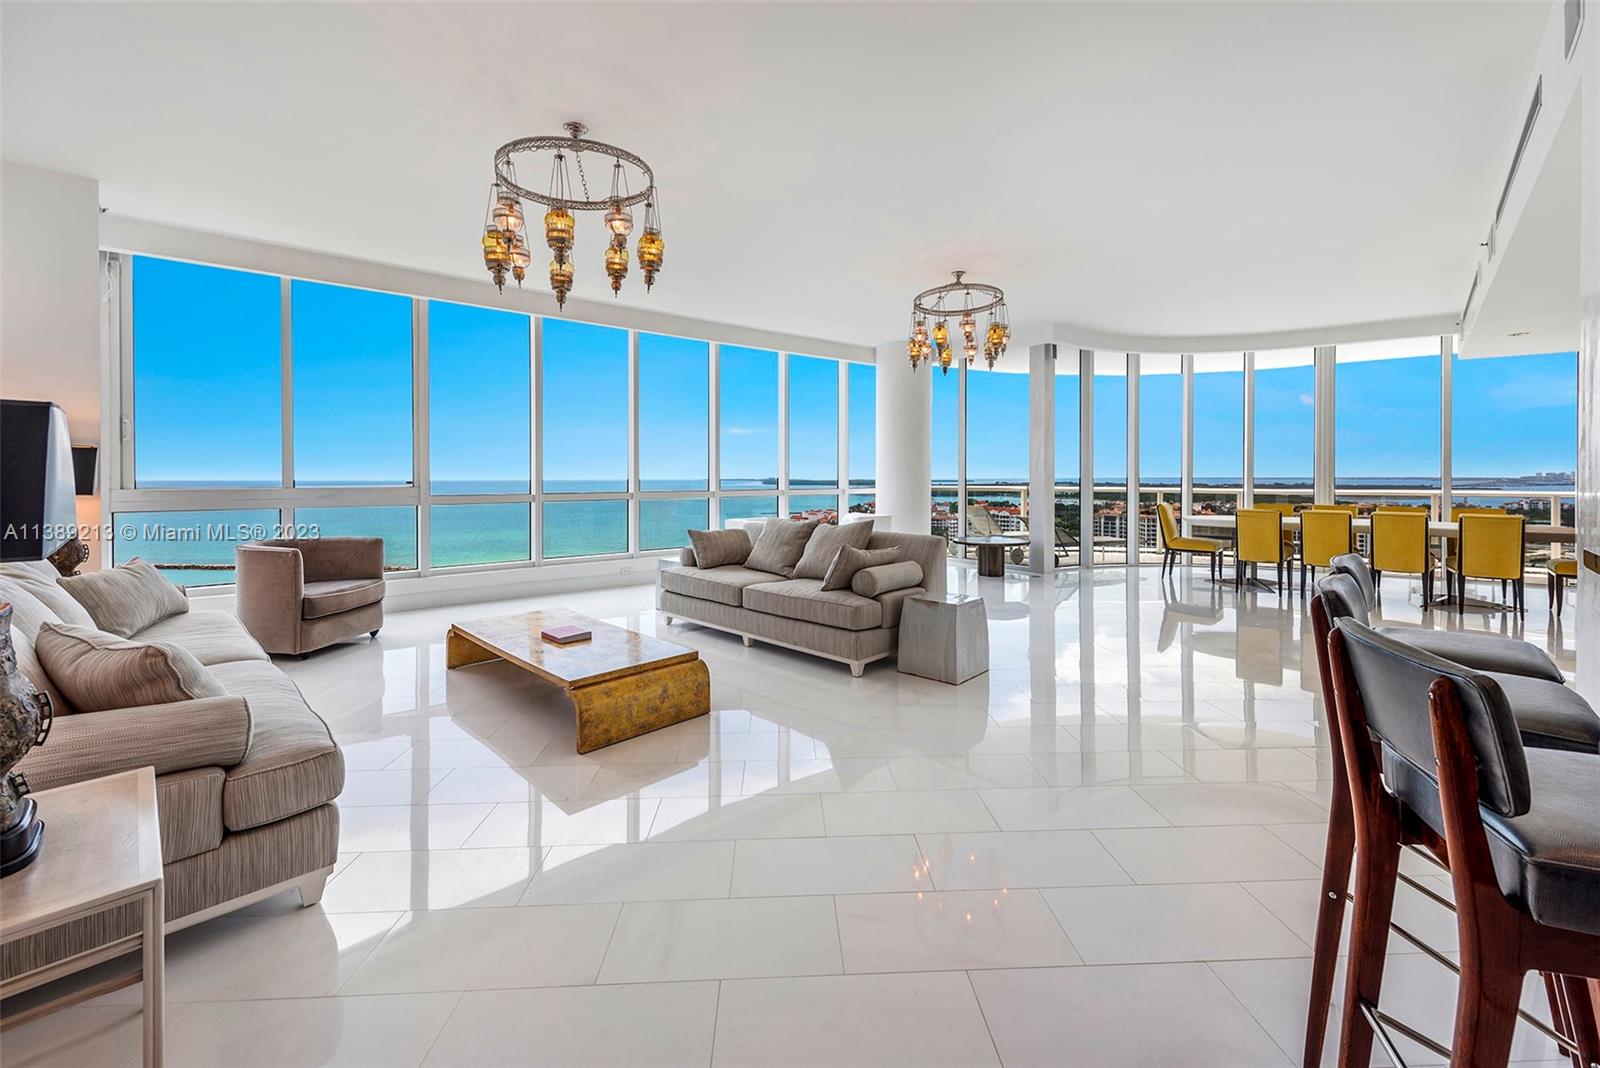 Stunning 4,776 square foot unit boasts over 180 degrees of breathtaking panoramic views of the Atlantic Ocean, Fisher Island, and Miami skyline. Featuring three large bedrooms, two offices, media room and open plan living. Continuum offers unparalleled luxury amenities on 13.5 acres, so enjoy luxurious resort style living including full-service spa, fitness center, 3 swimming pools, private beach access. Building offers 24-hour concierge service and guard gate, ensuring the utmost privacy and security. Located in Miami Beach's prestigious South of Fifth neighborhood, Continuum is just steps away from world-class restaurants, designer shops, and cultural attractions.